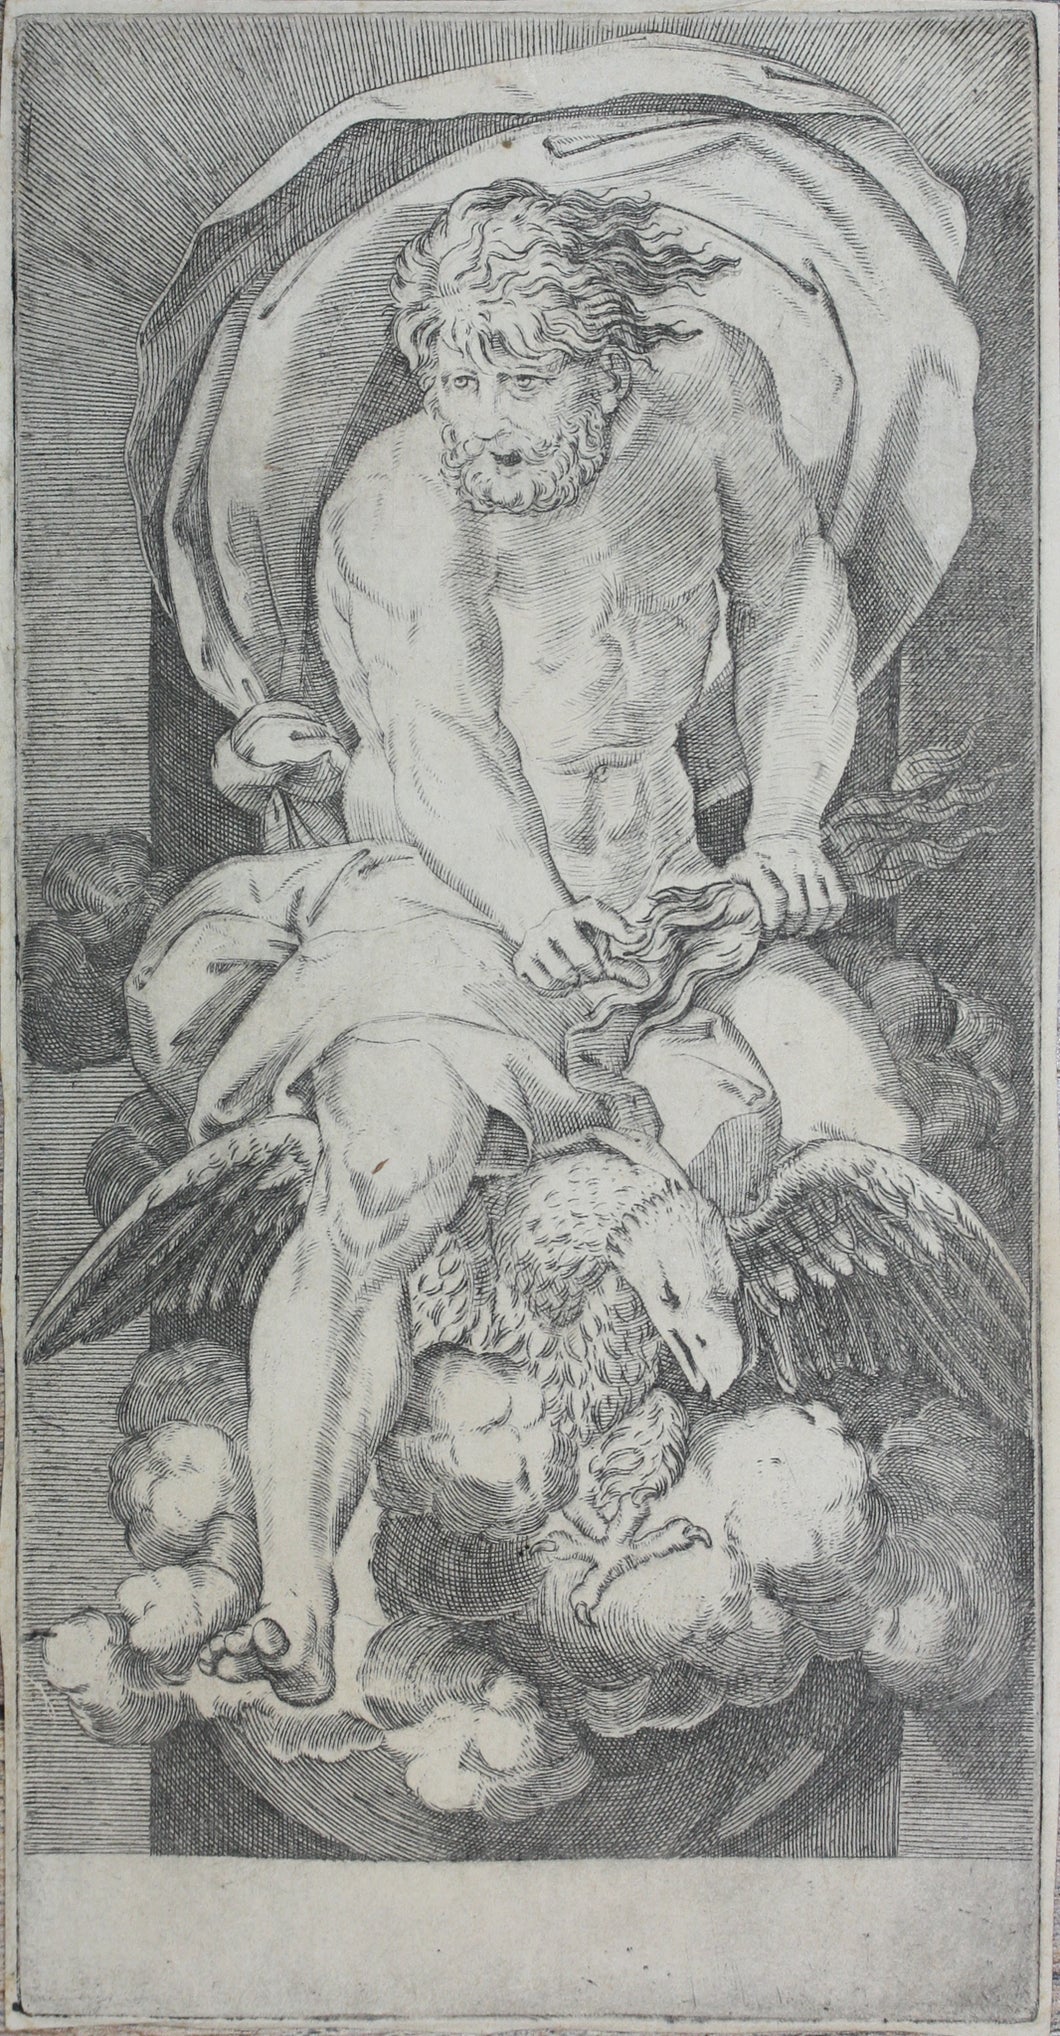 Rosso Fiorentino, after. Jacopo Caraglio, after. Jupiter. Engraving. XVI C.